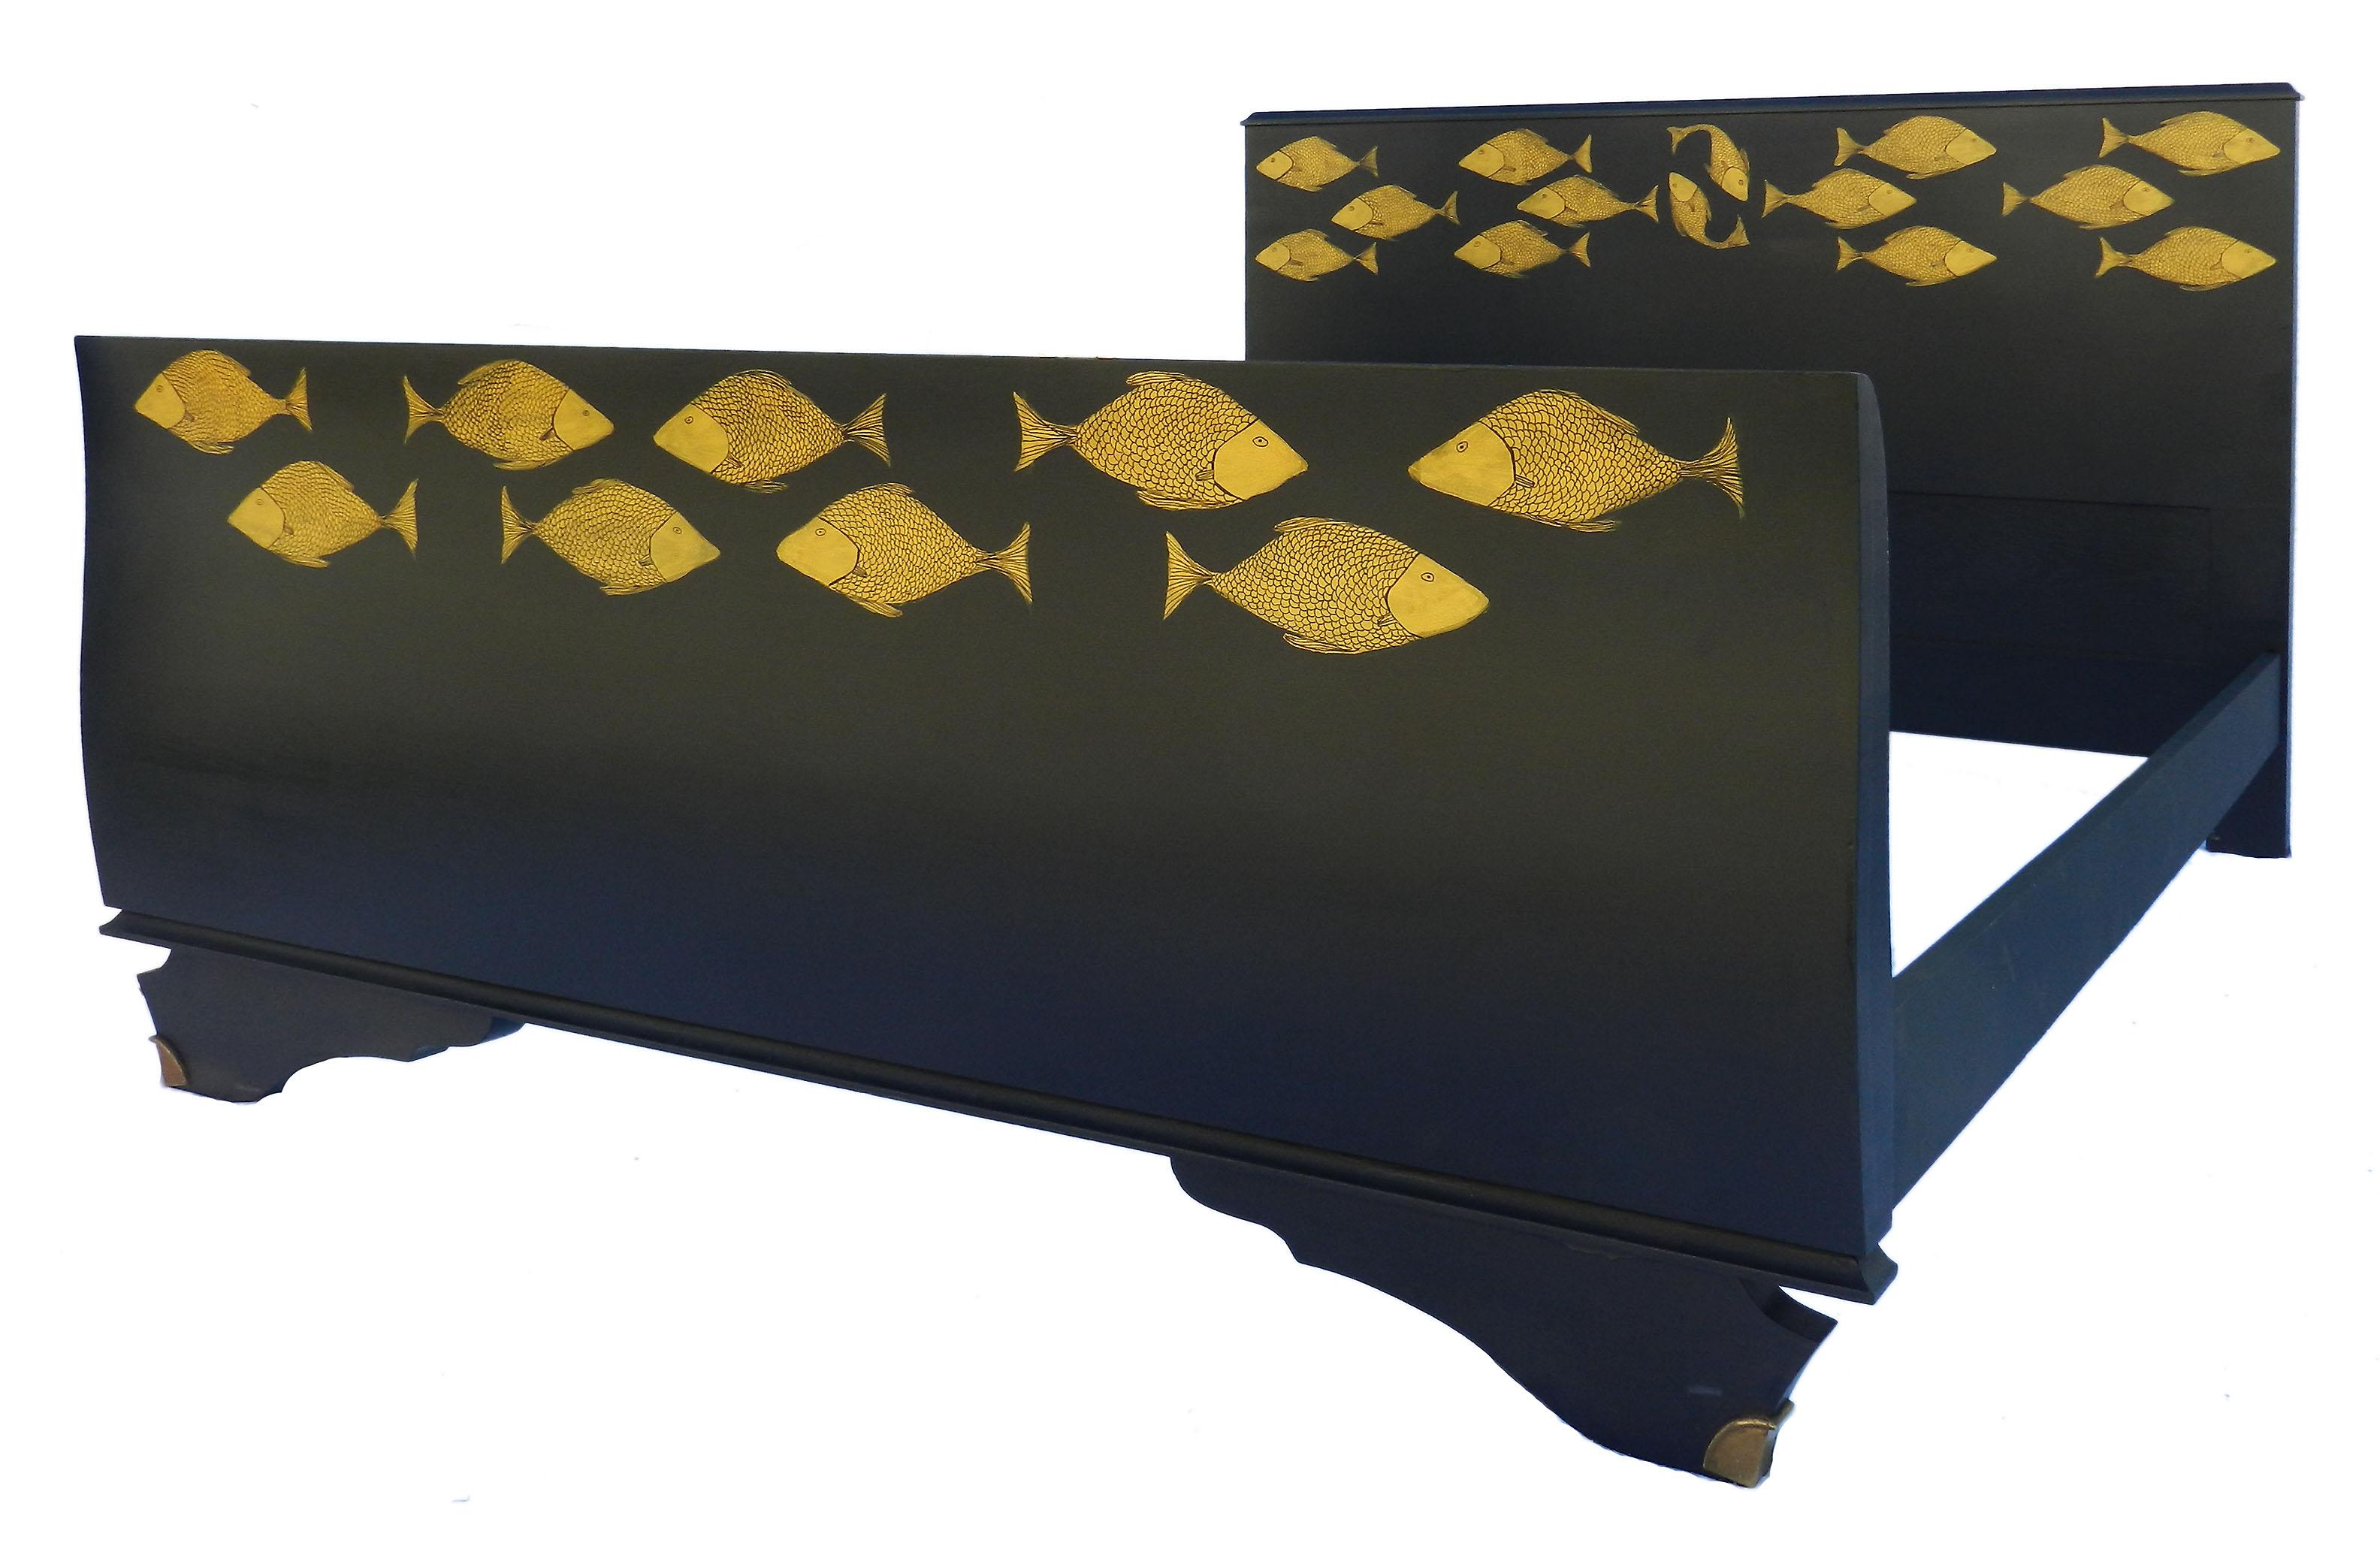 Midcentury French Bed hand painted original work by Contemporary Artist Perez Petriarte
Free Shipping to USA, EU, UK please do check with us for other countries that may be included
Ideal for a Midcentury House Interior or Loft or any interior where